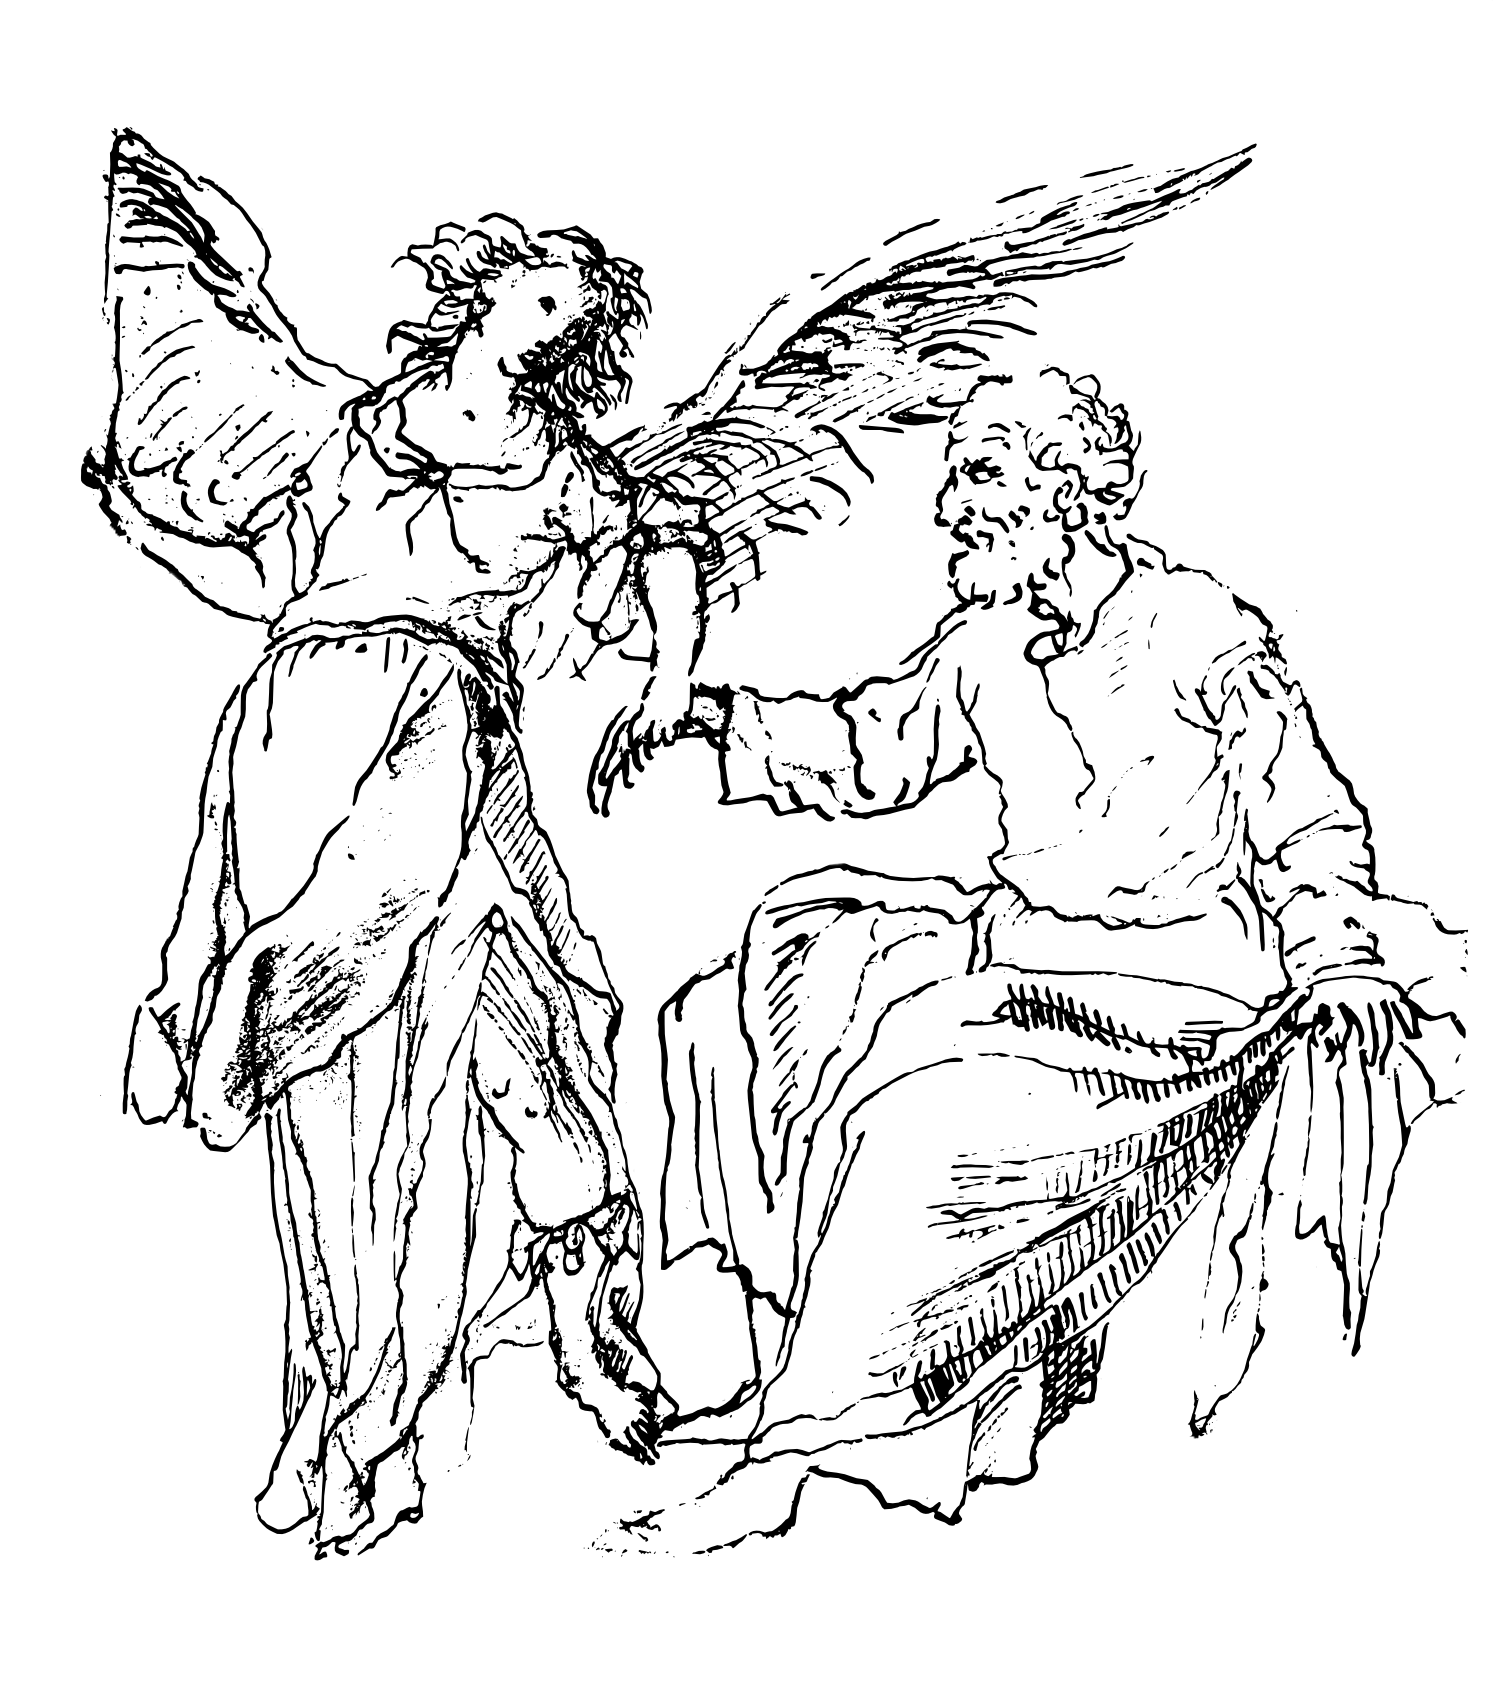 Angel Leading Saint Peter out of Prison (17th Century) - Catholic Coloring Page